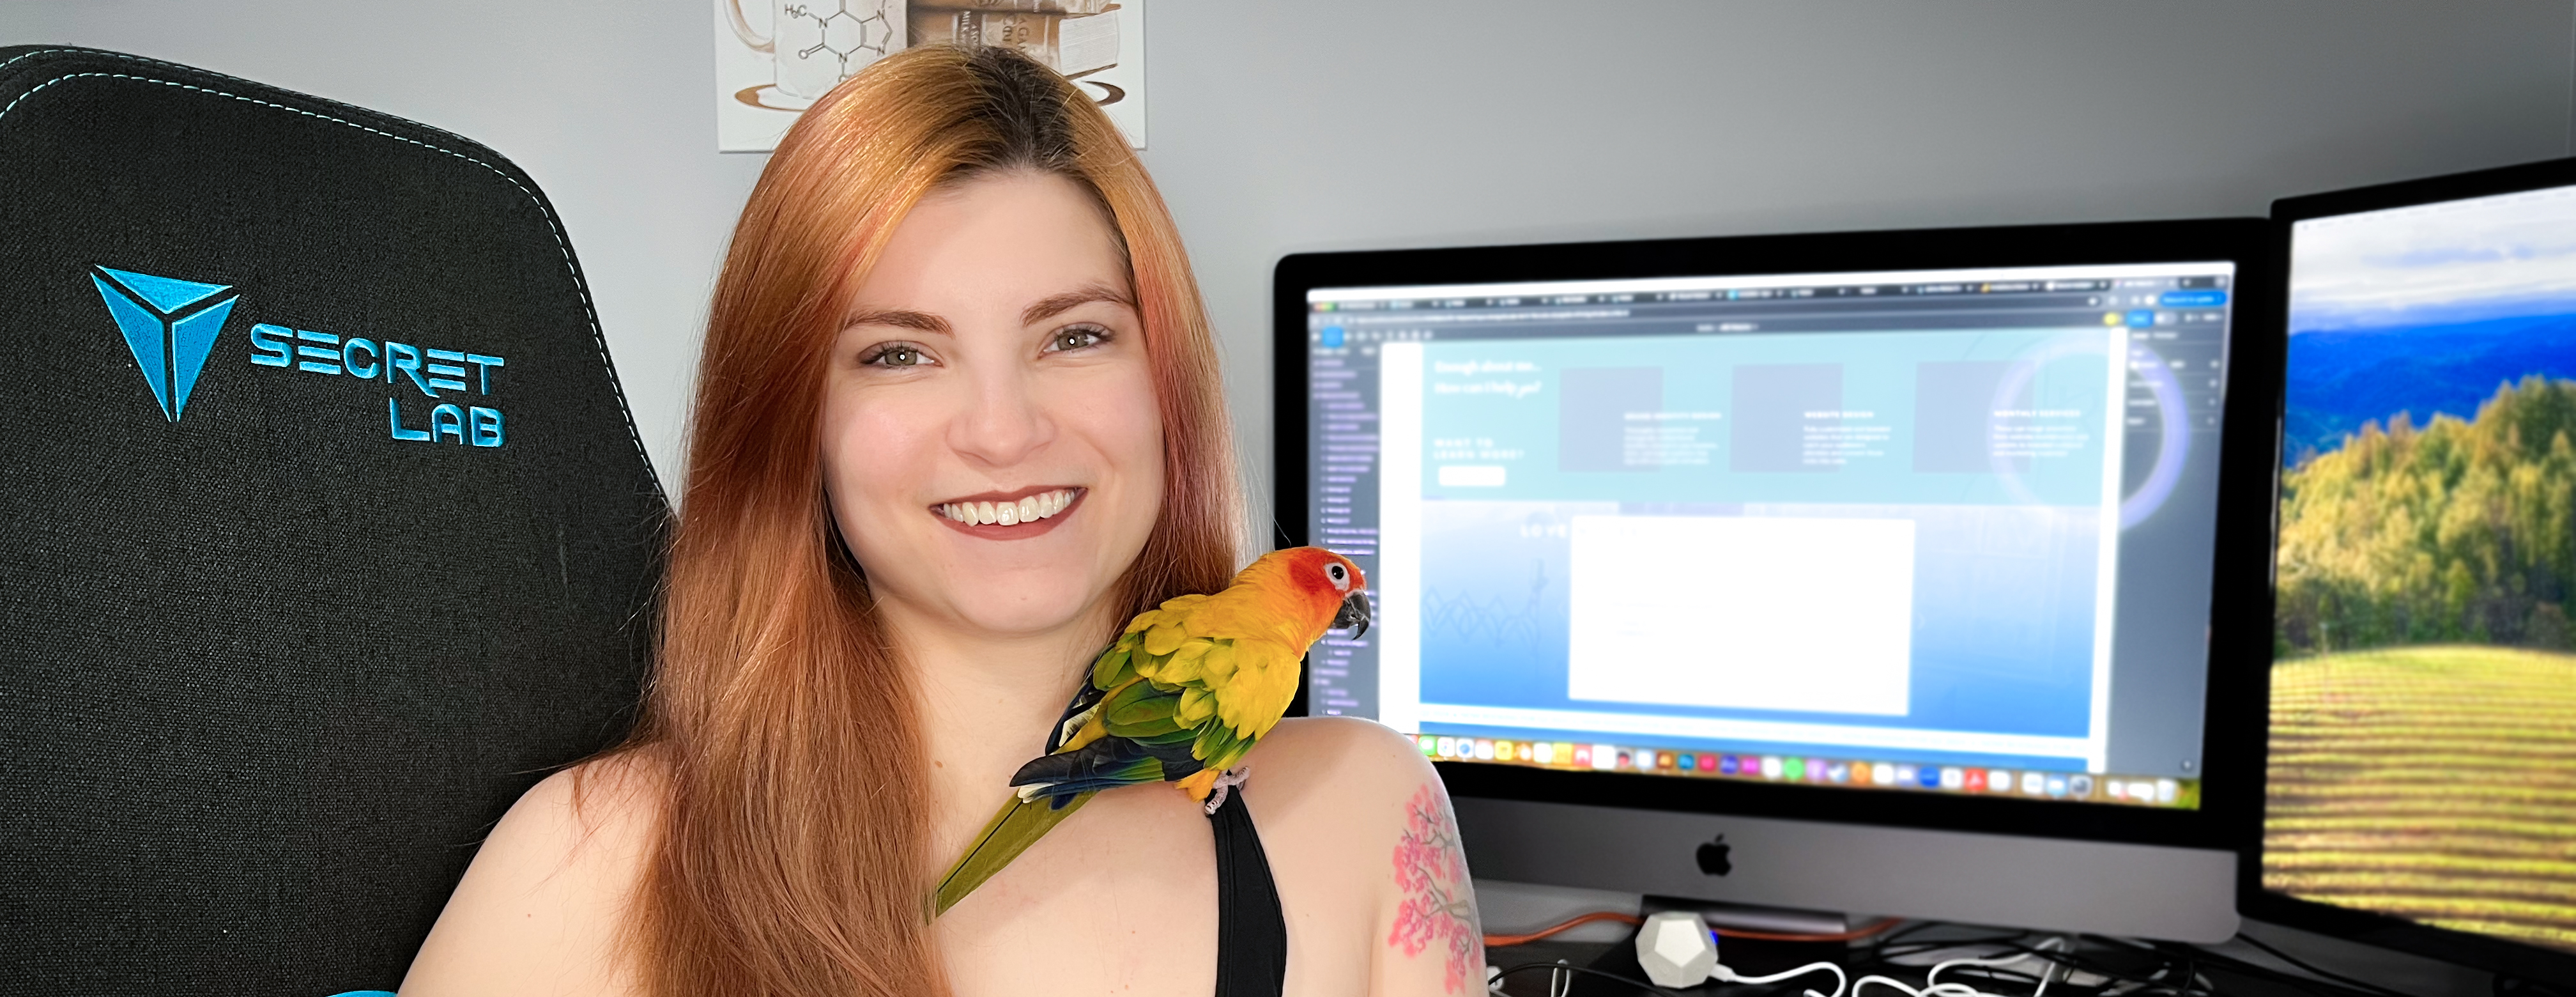 Image of Jaime with her sun conure, Loki, sitting in front of her computer with Showit website builder open on the screen.